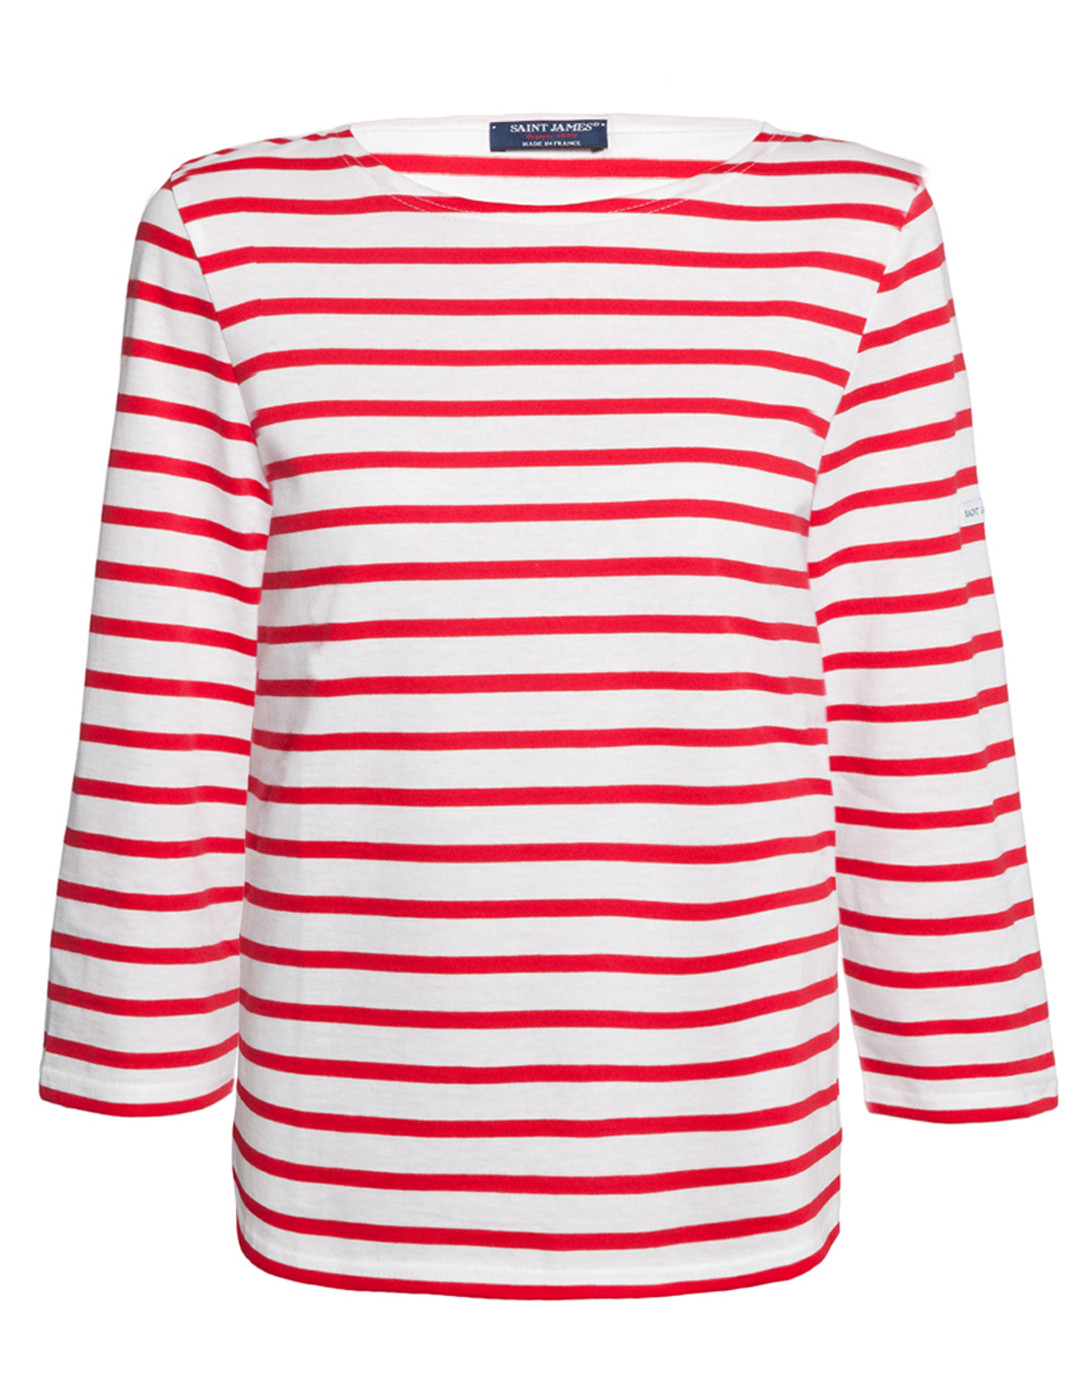 Galathee White and Red Striped Shirt ...